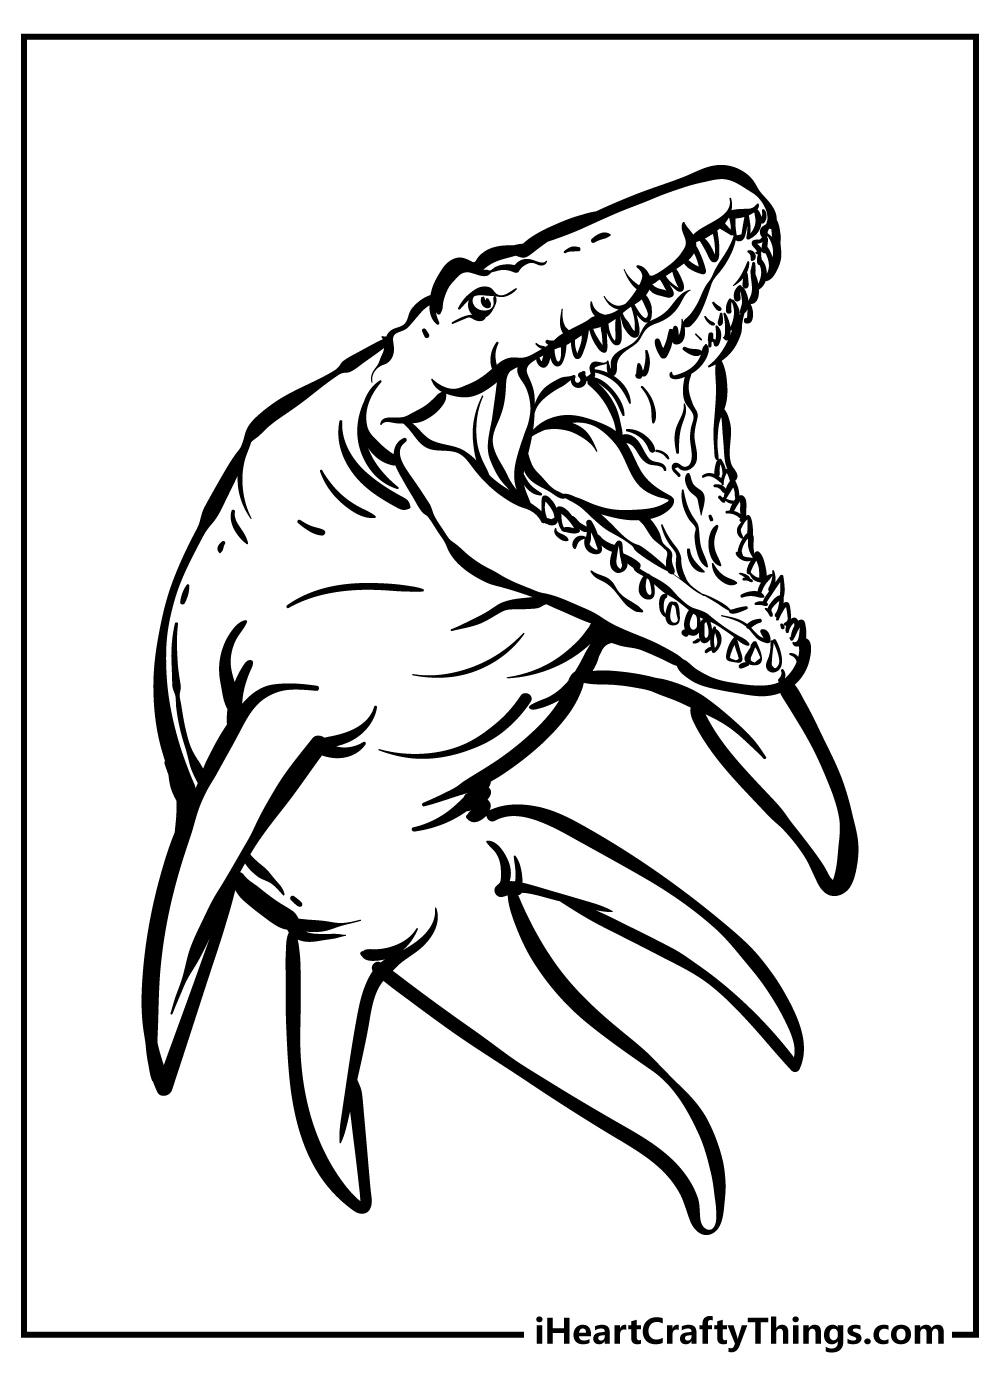 Coloring Pages Jurassic World Free Coloring Pages Printable